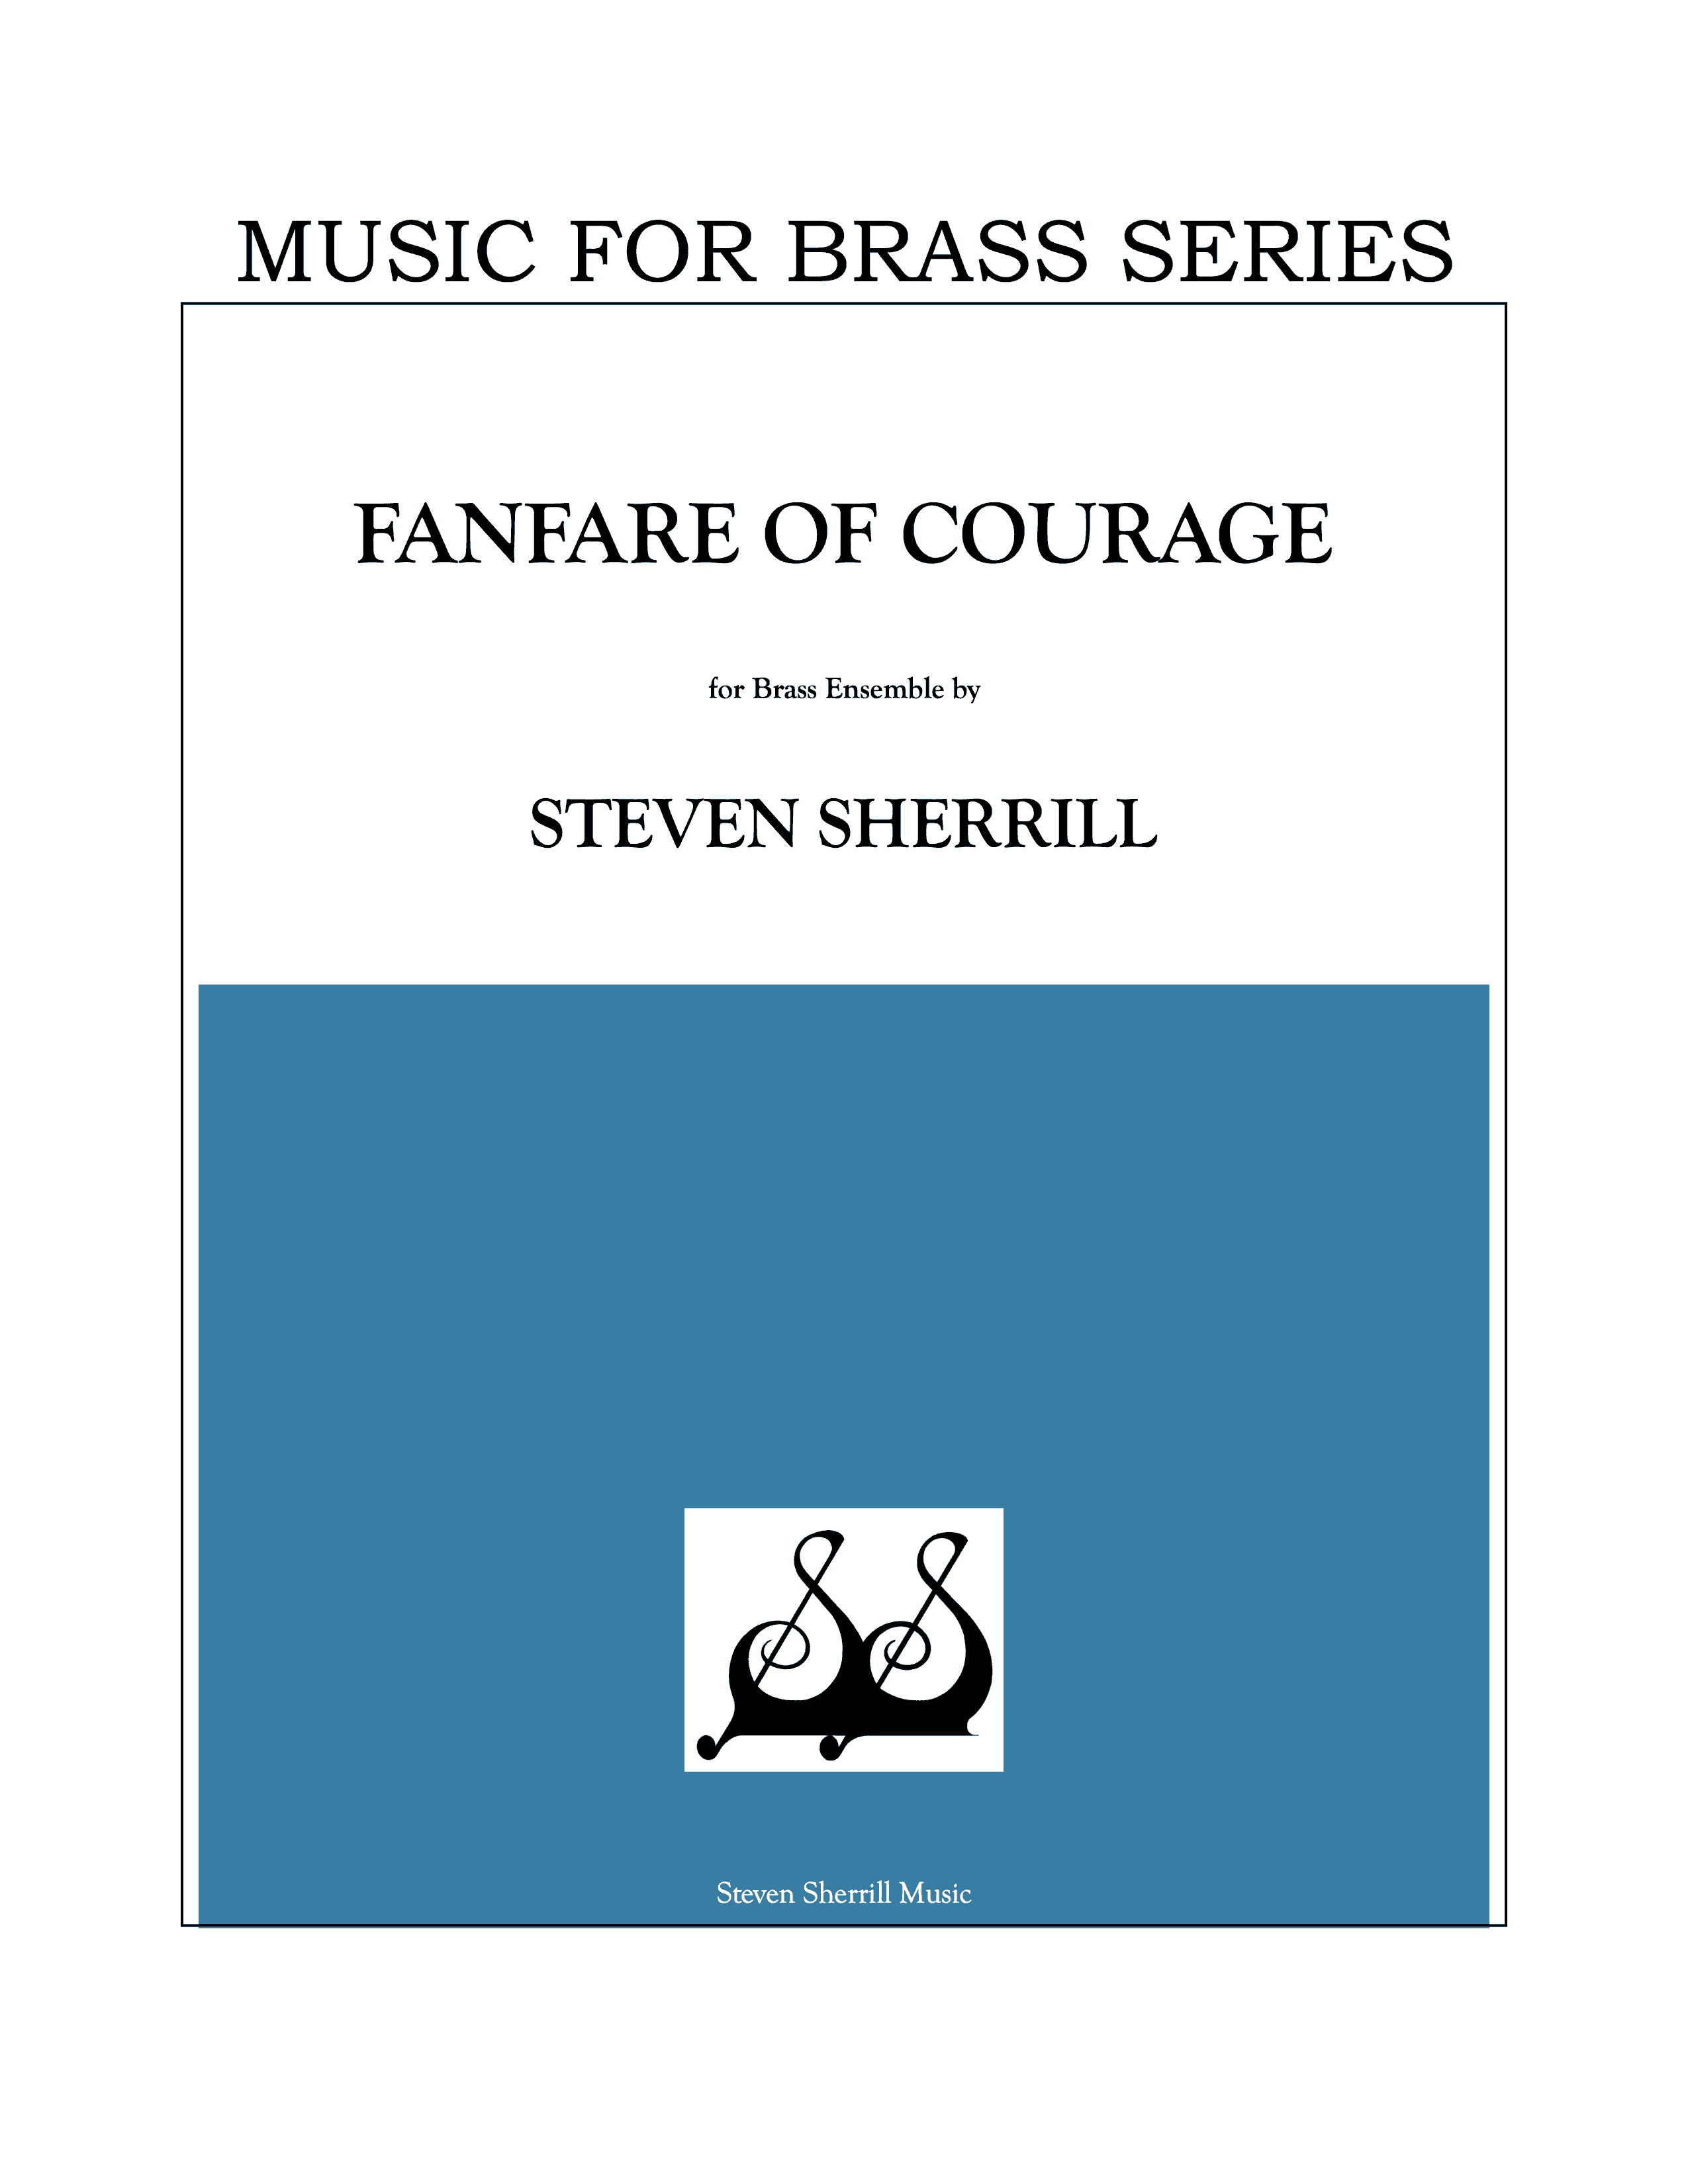 Fanfare of Courage cover page